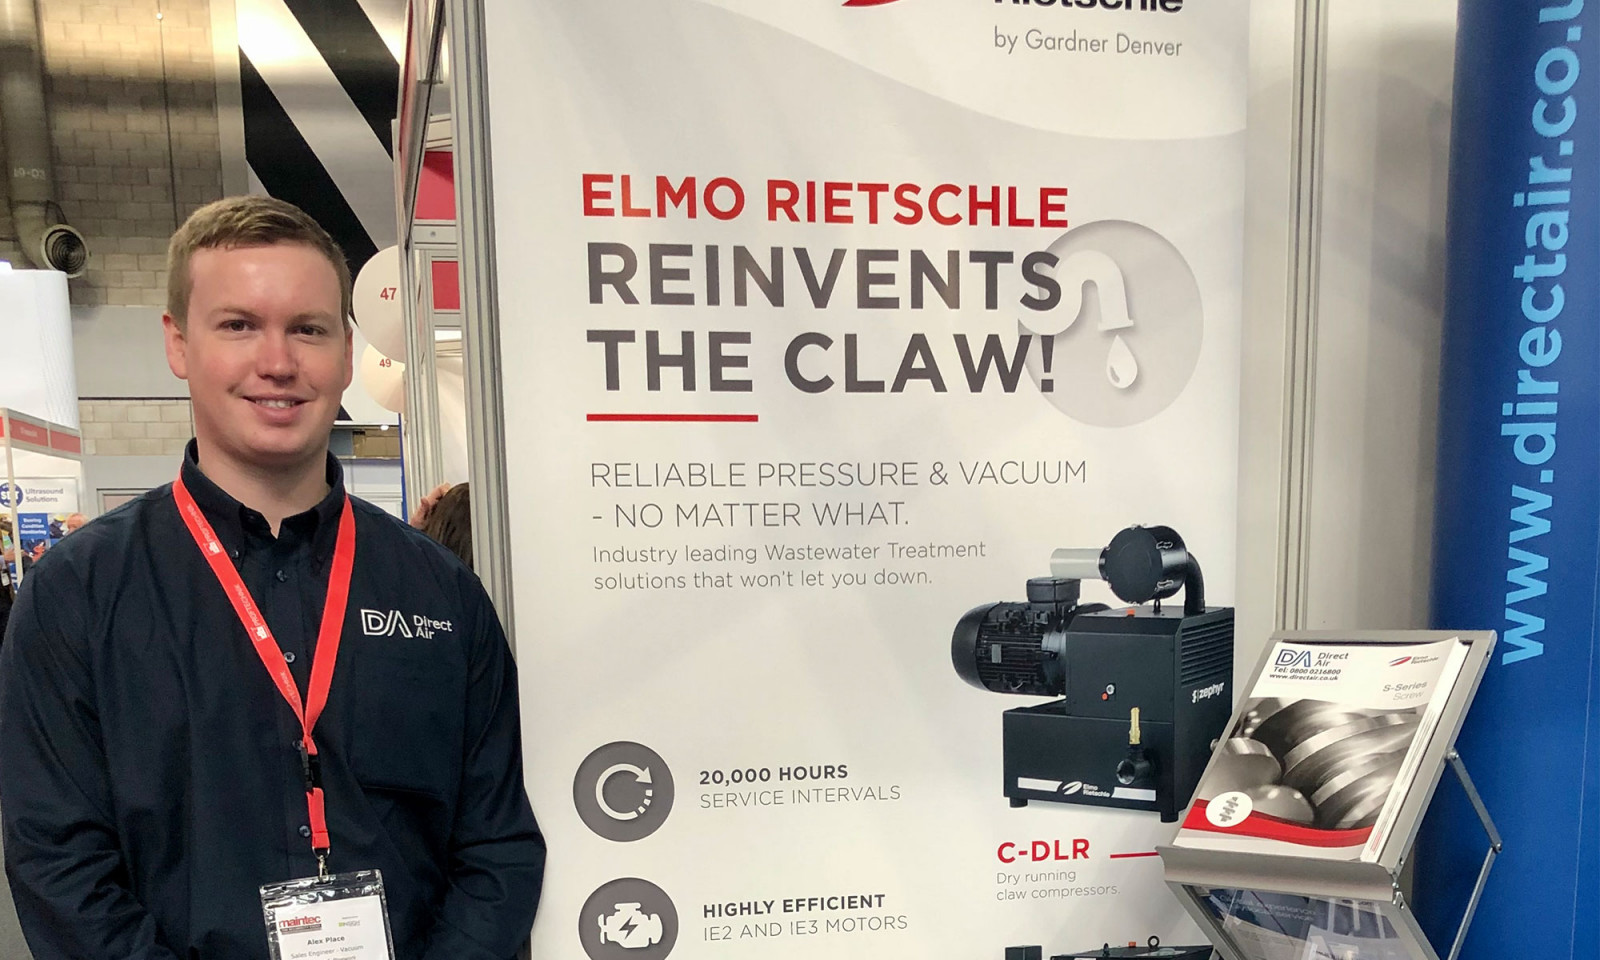 Direct Air appointed as new Elmo Rietschele distributors